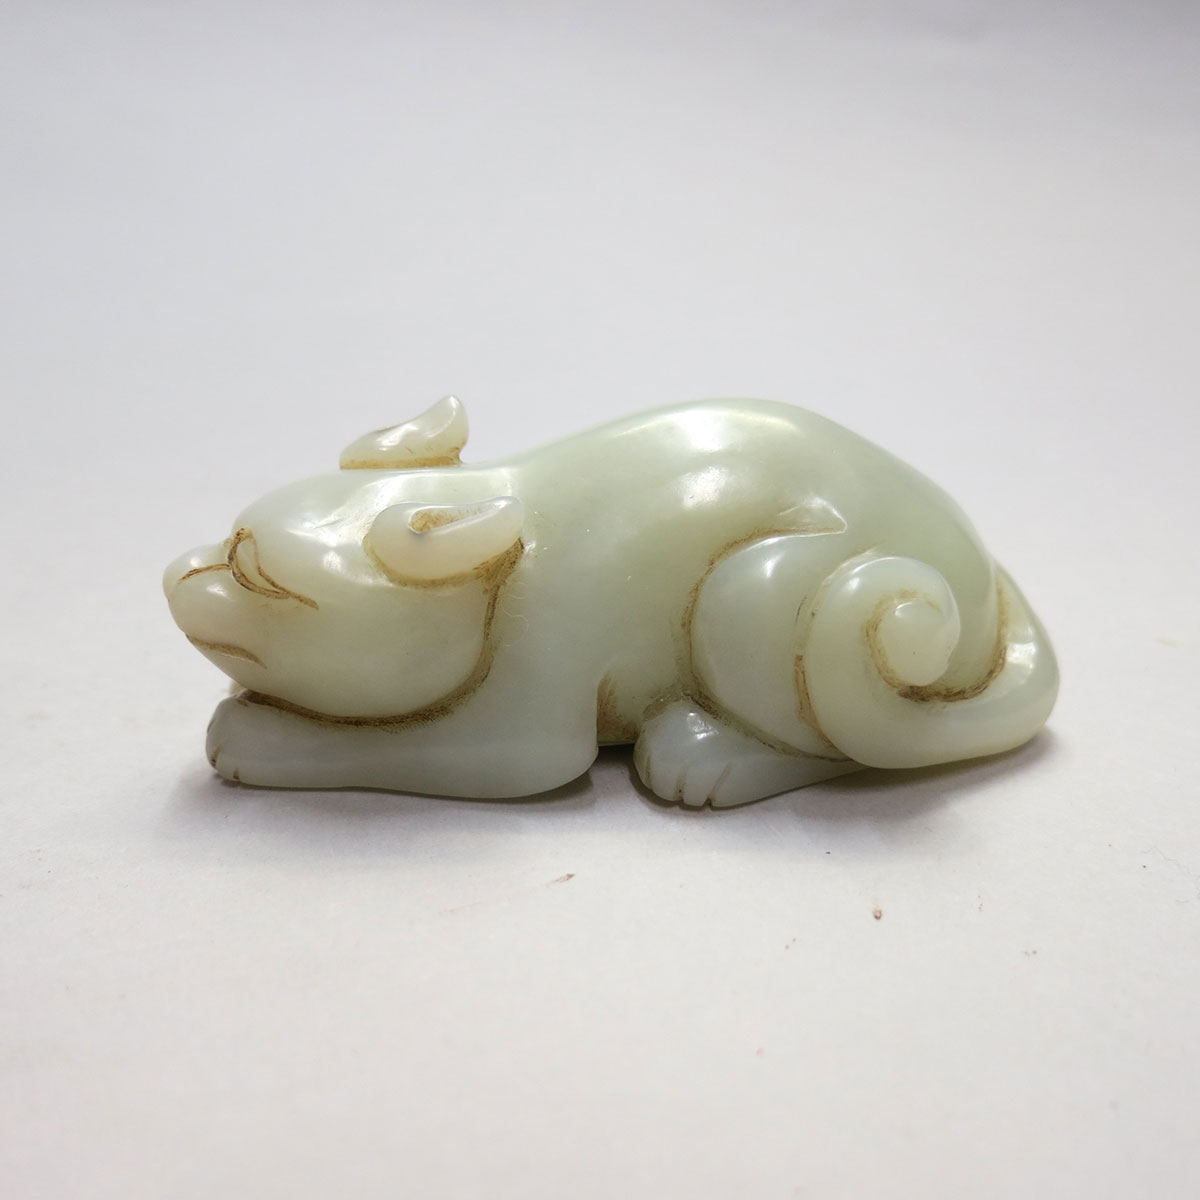 Pale Celadon Jade Carving of a Cat